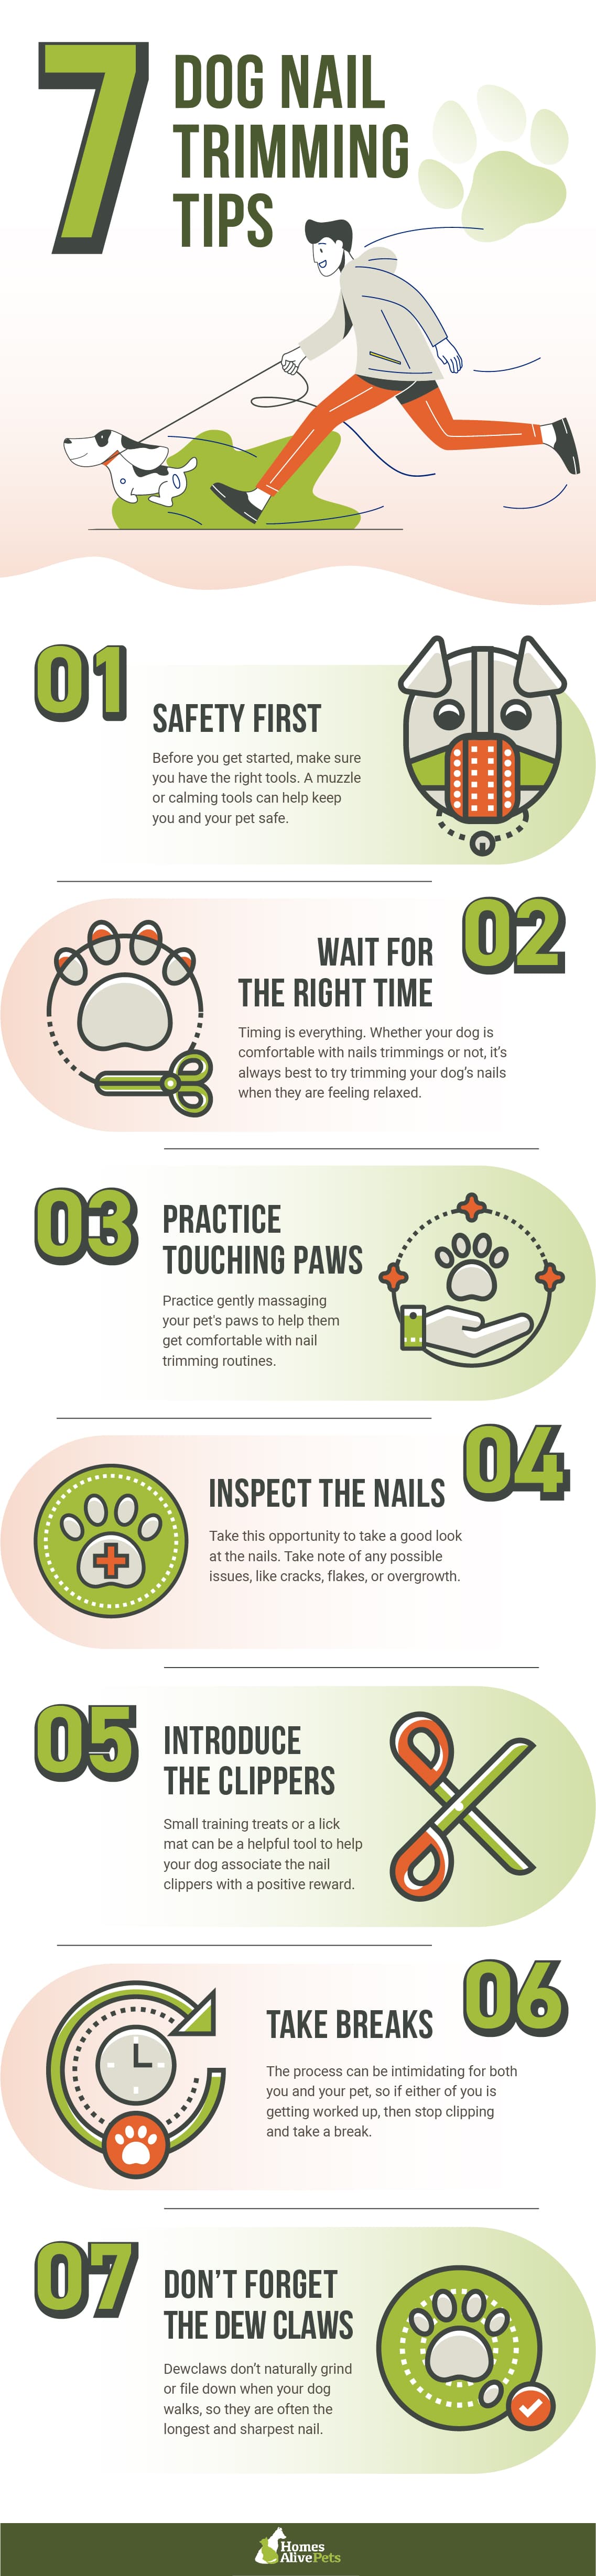 Five tips when cutting dog nails - Lyons Veterinary Clinic